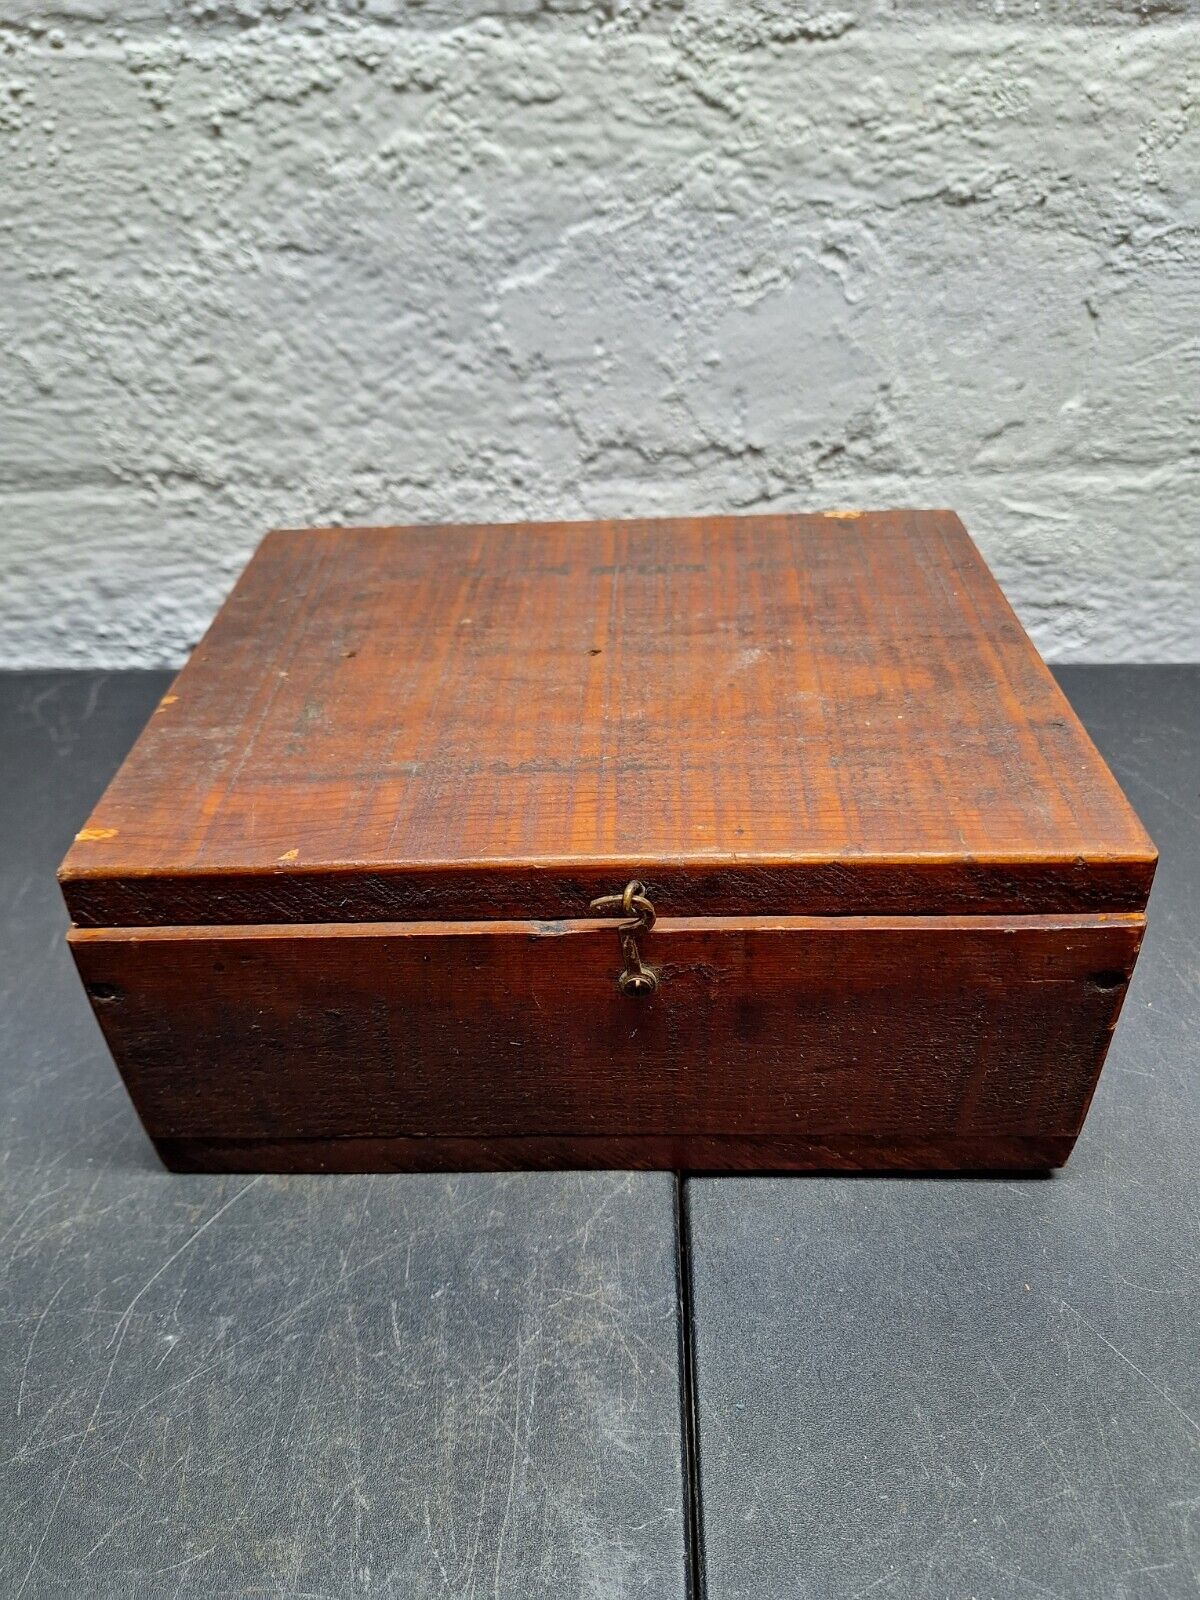 10 X 8X 4.5 IN DECORATIVE WOOD CARVED BOX USED